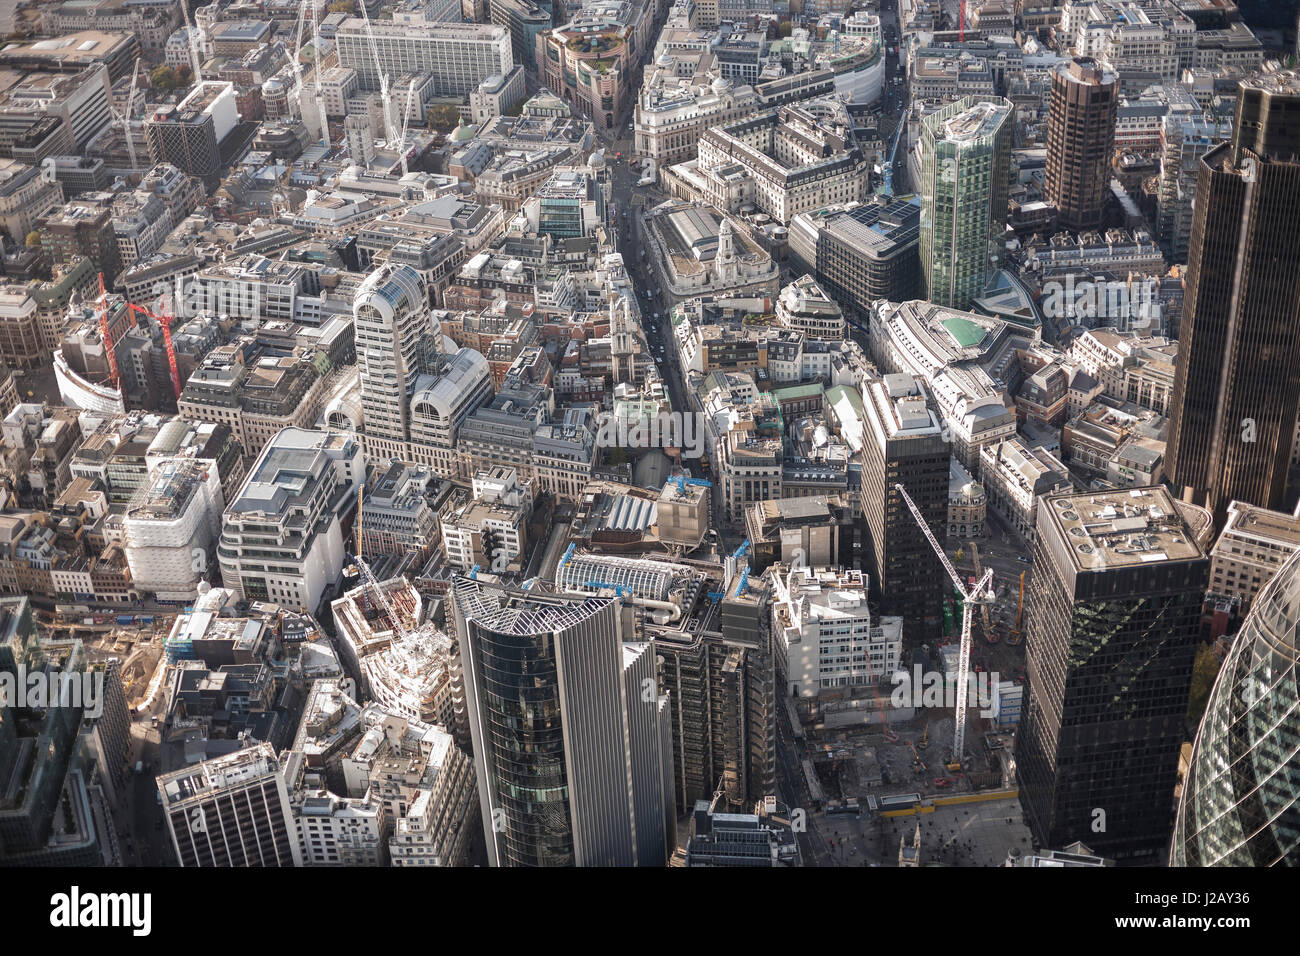 Full frame aerial view of city, London, England, UK Stock Photo